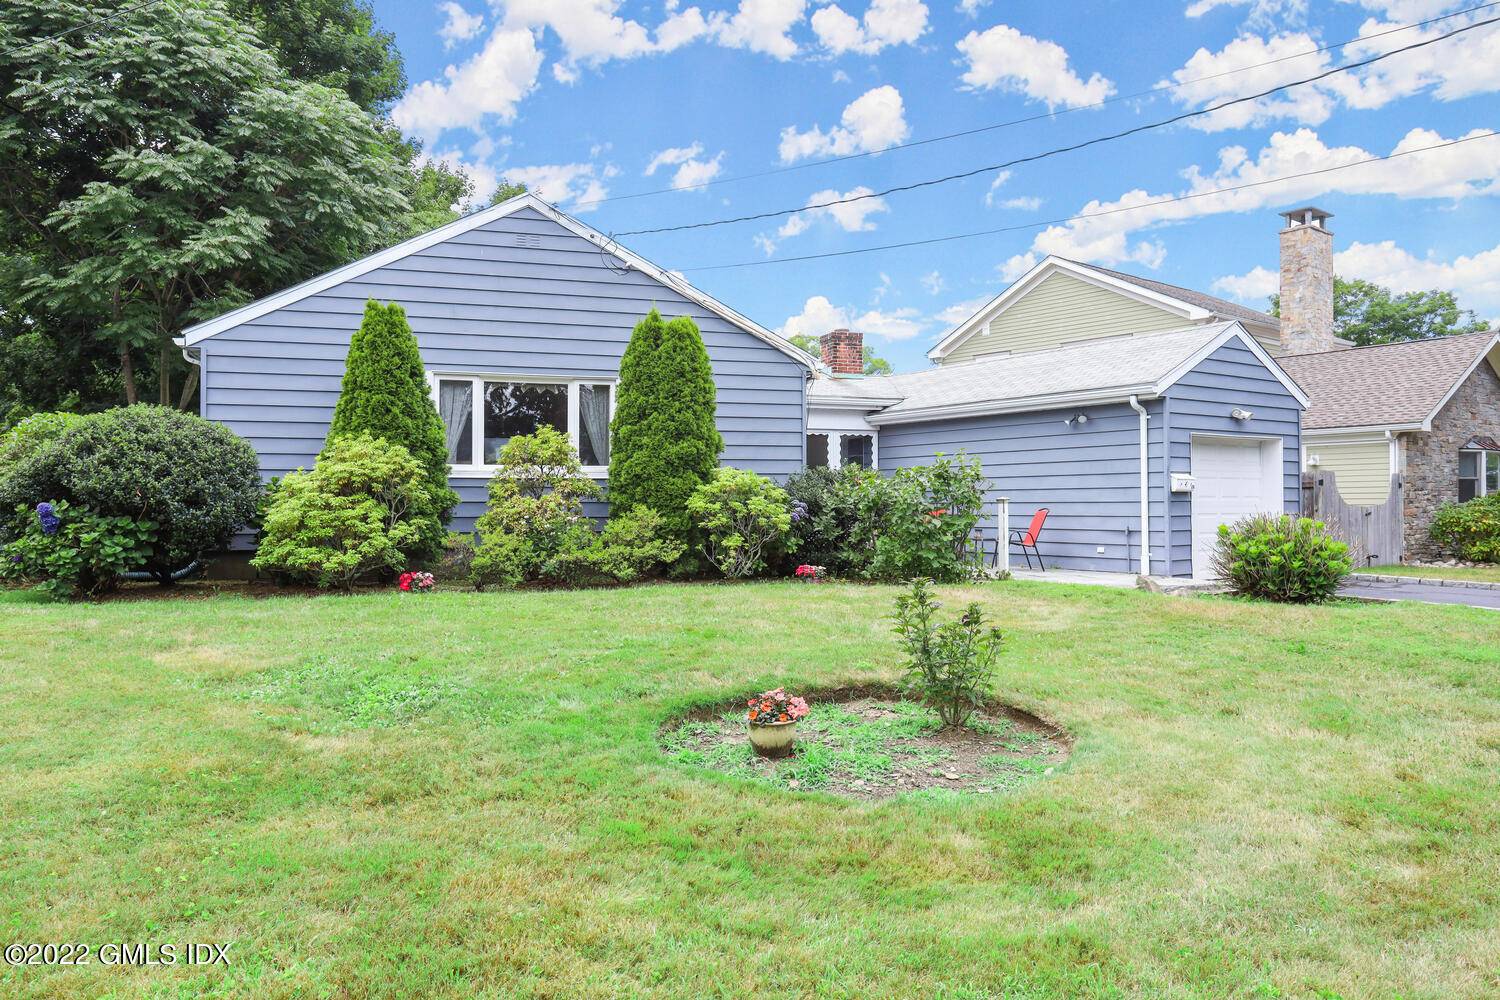 Opportunity in the desirable Loughlin Park area of Cos Cob that's an ideal starter home, investment property, and or forever home.